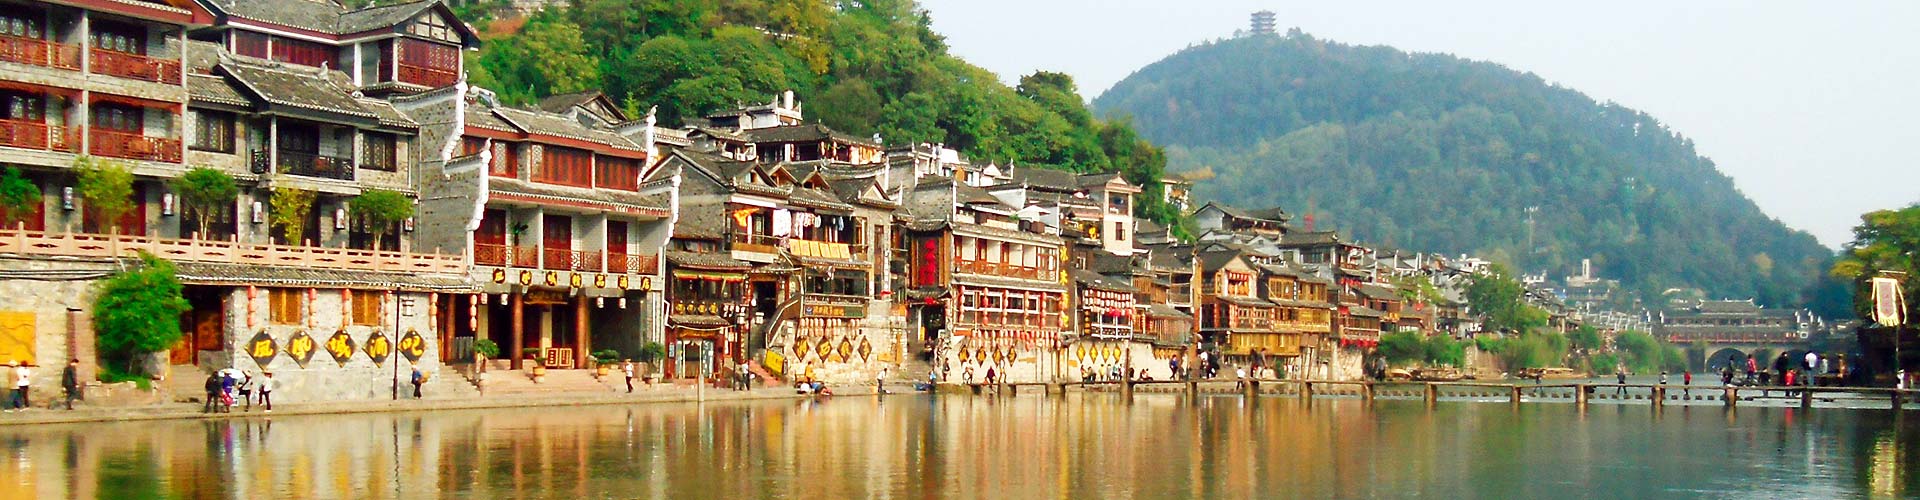 Travel to Fenghuang